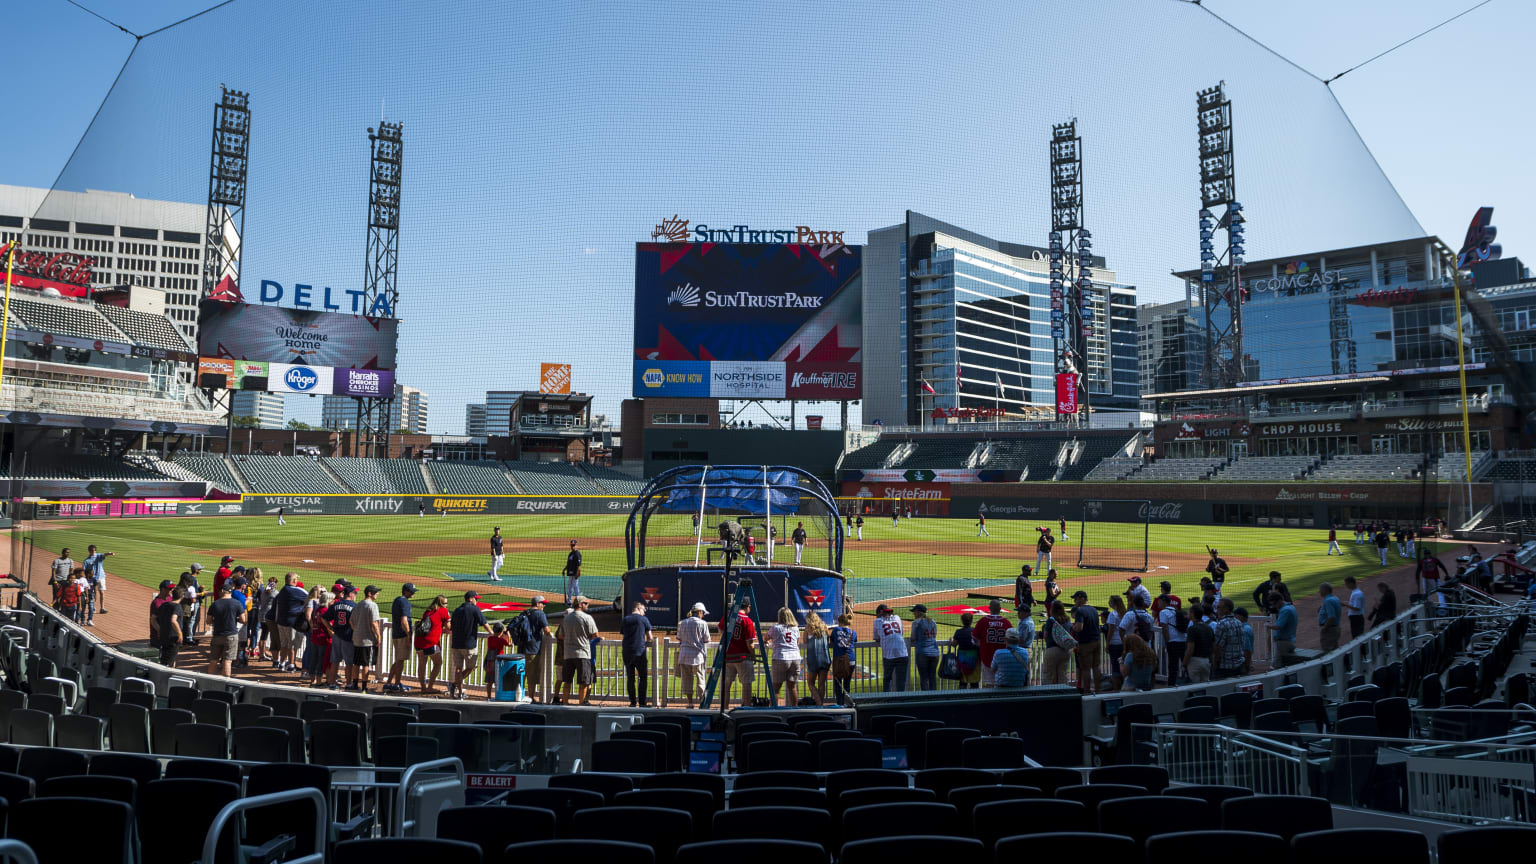 SunTrust Park, The Braves and “The Chop” - 4Bases4Kids